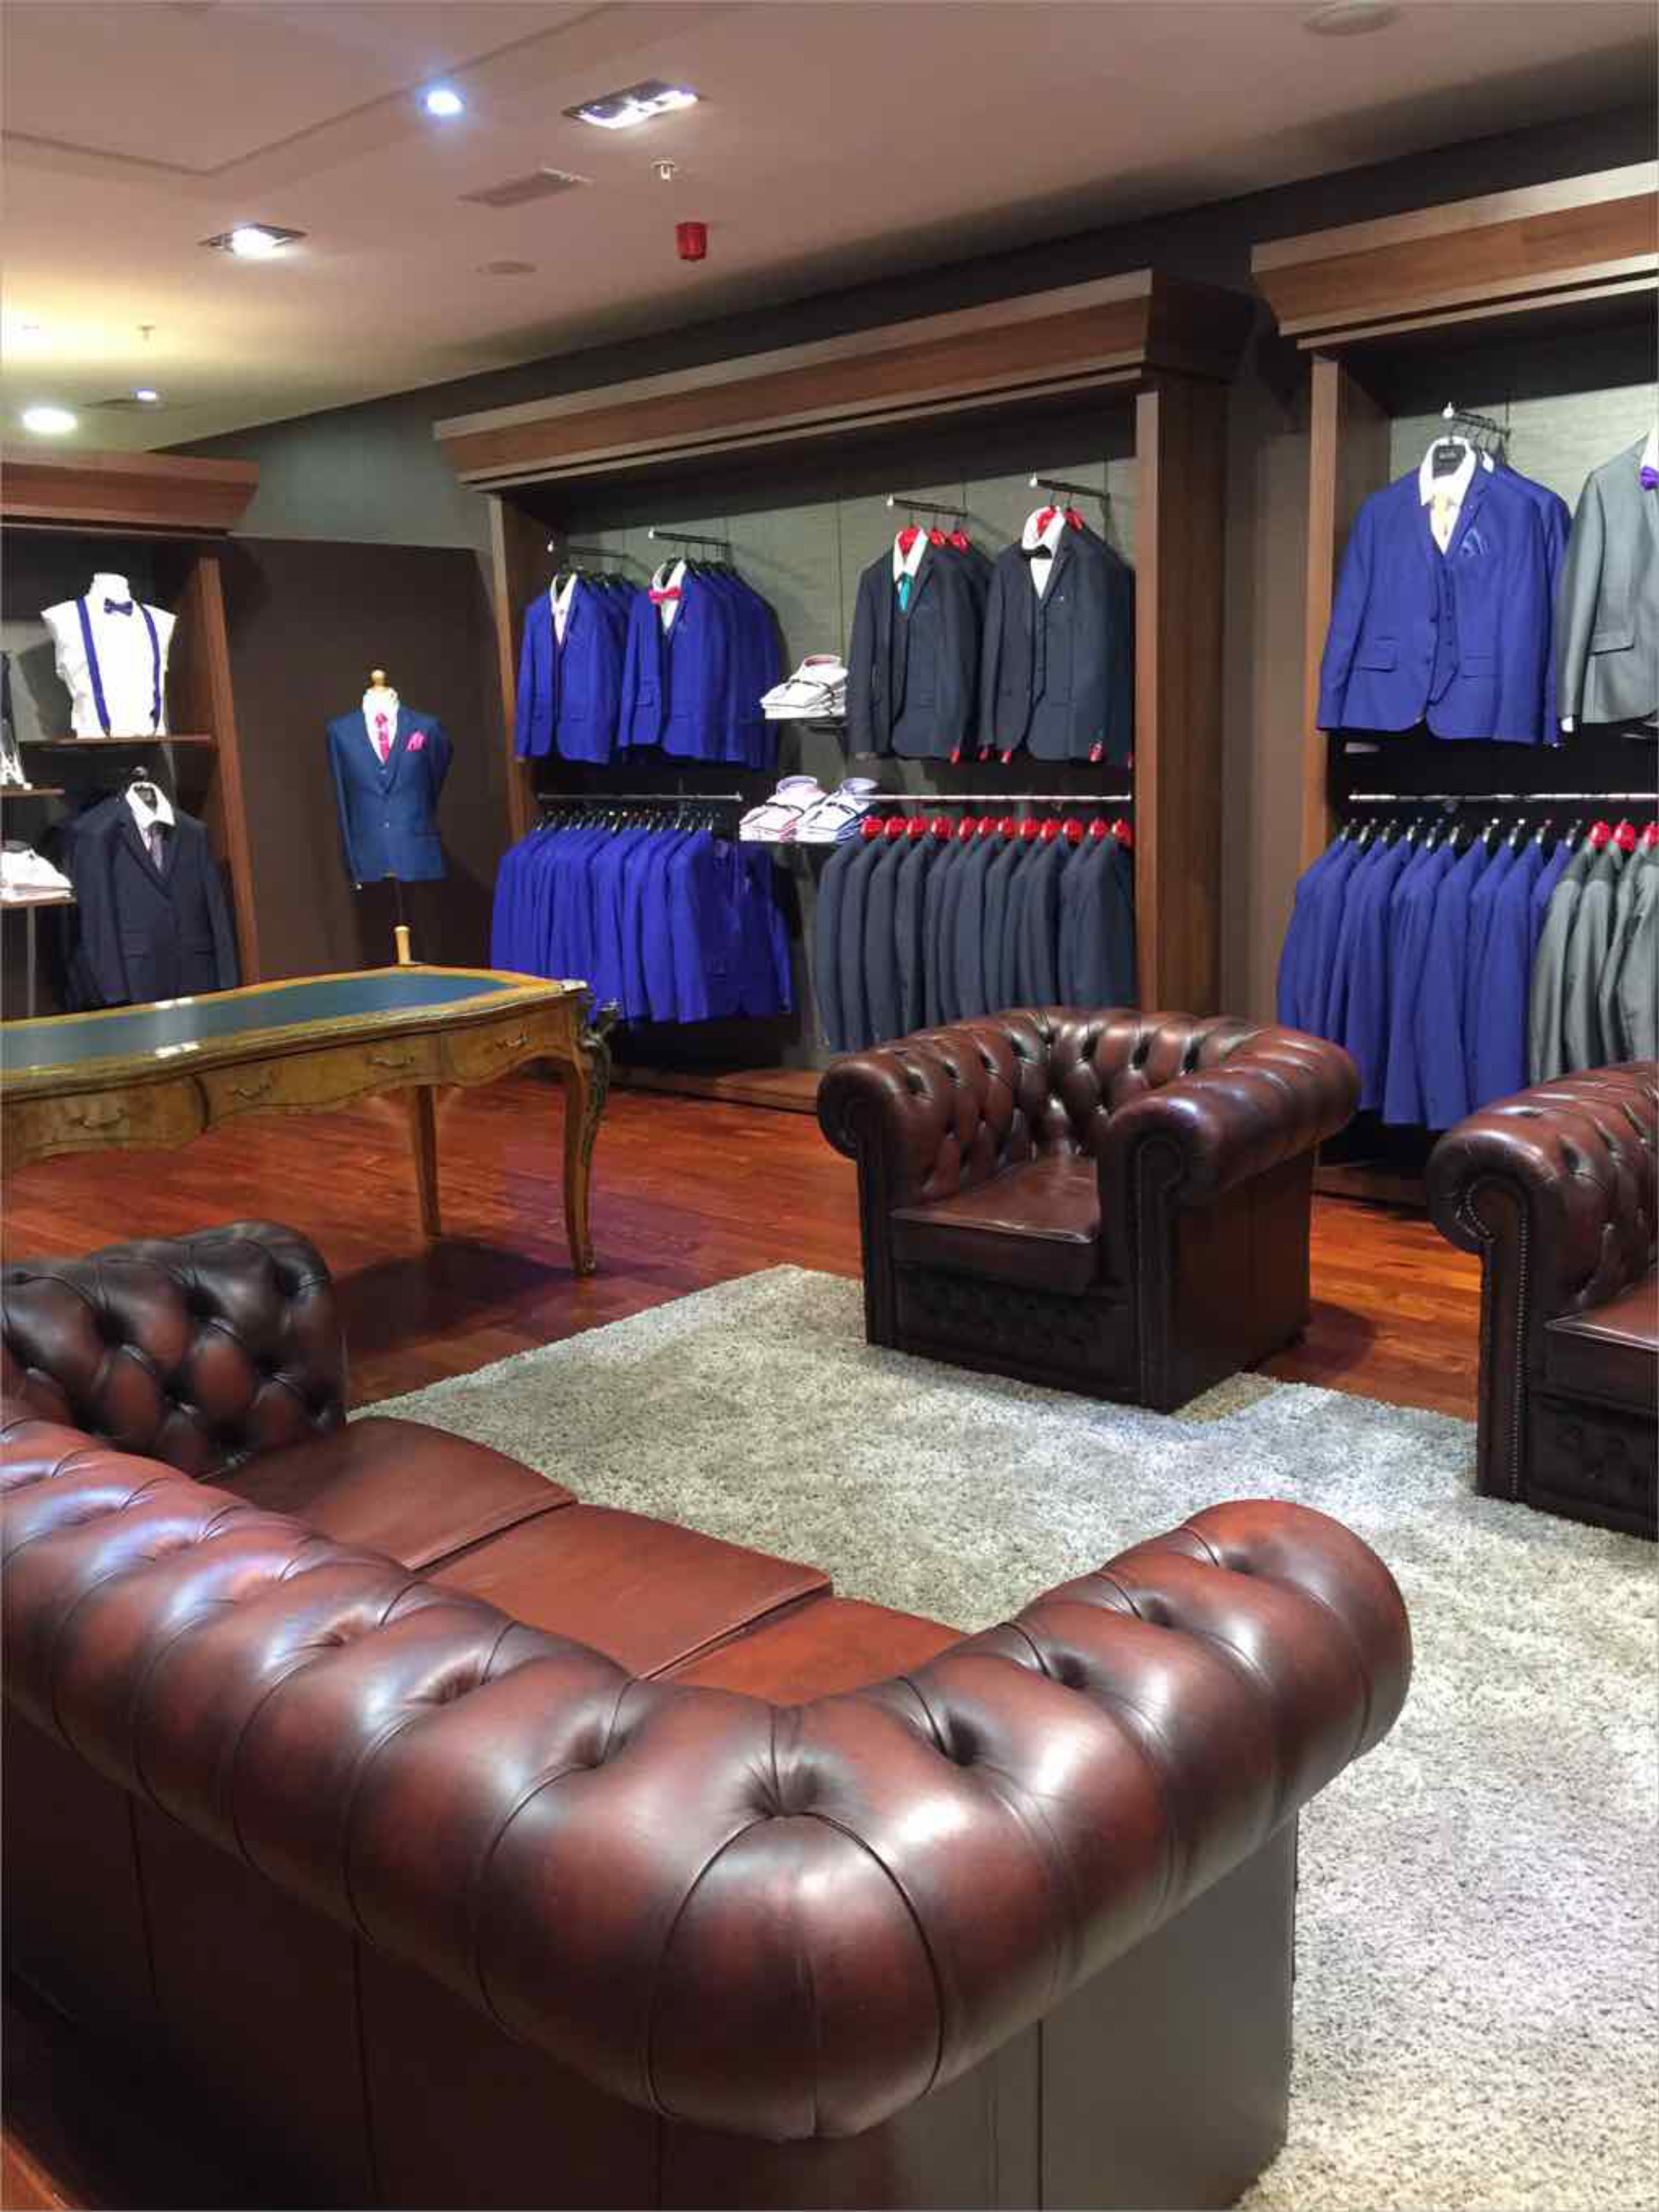 Menswear suit department with comfortable seating area and merchandising systems.